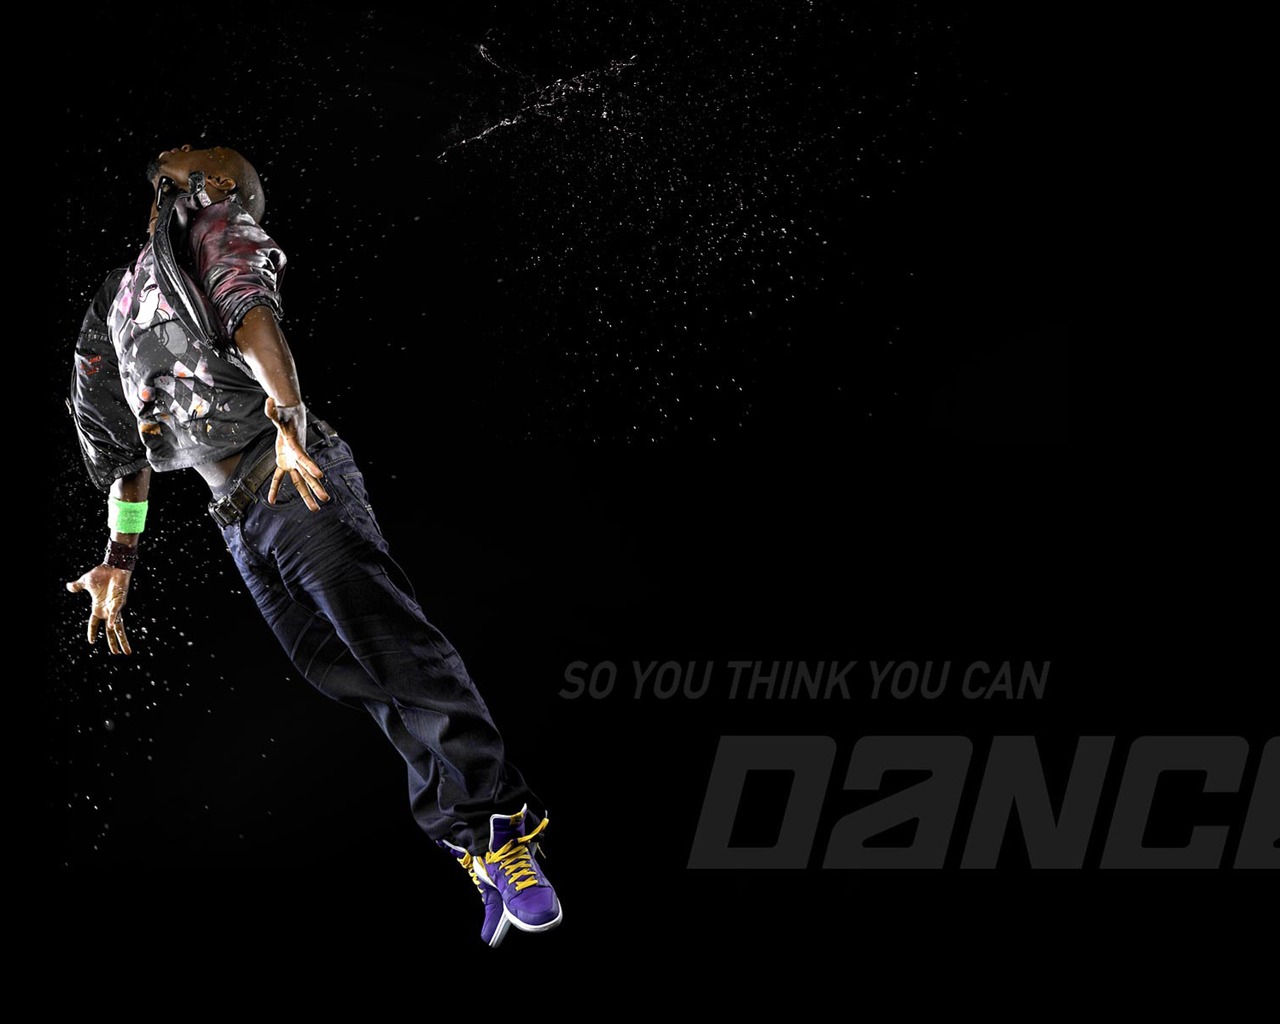 So You Think You Can Dance Wallpaper (1) #10 - 1280x1024